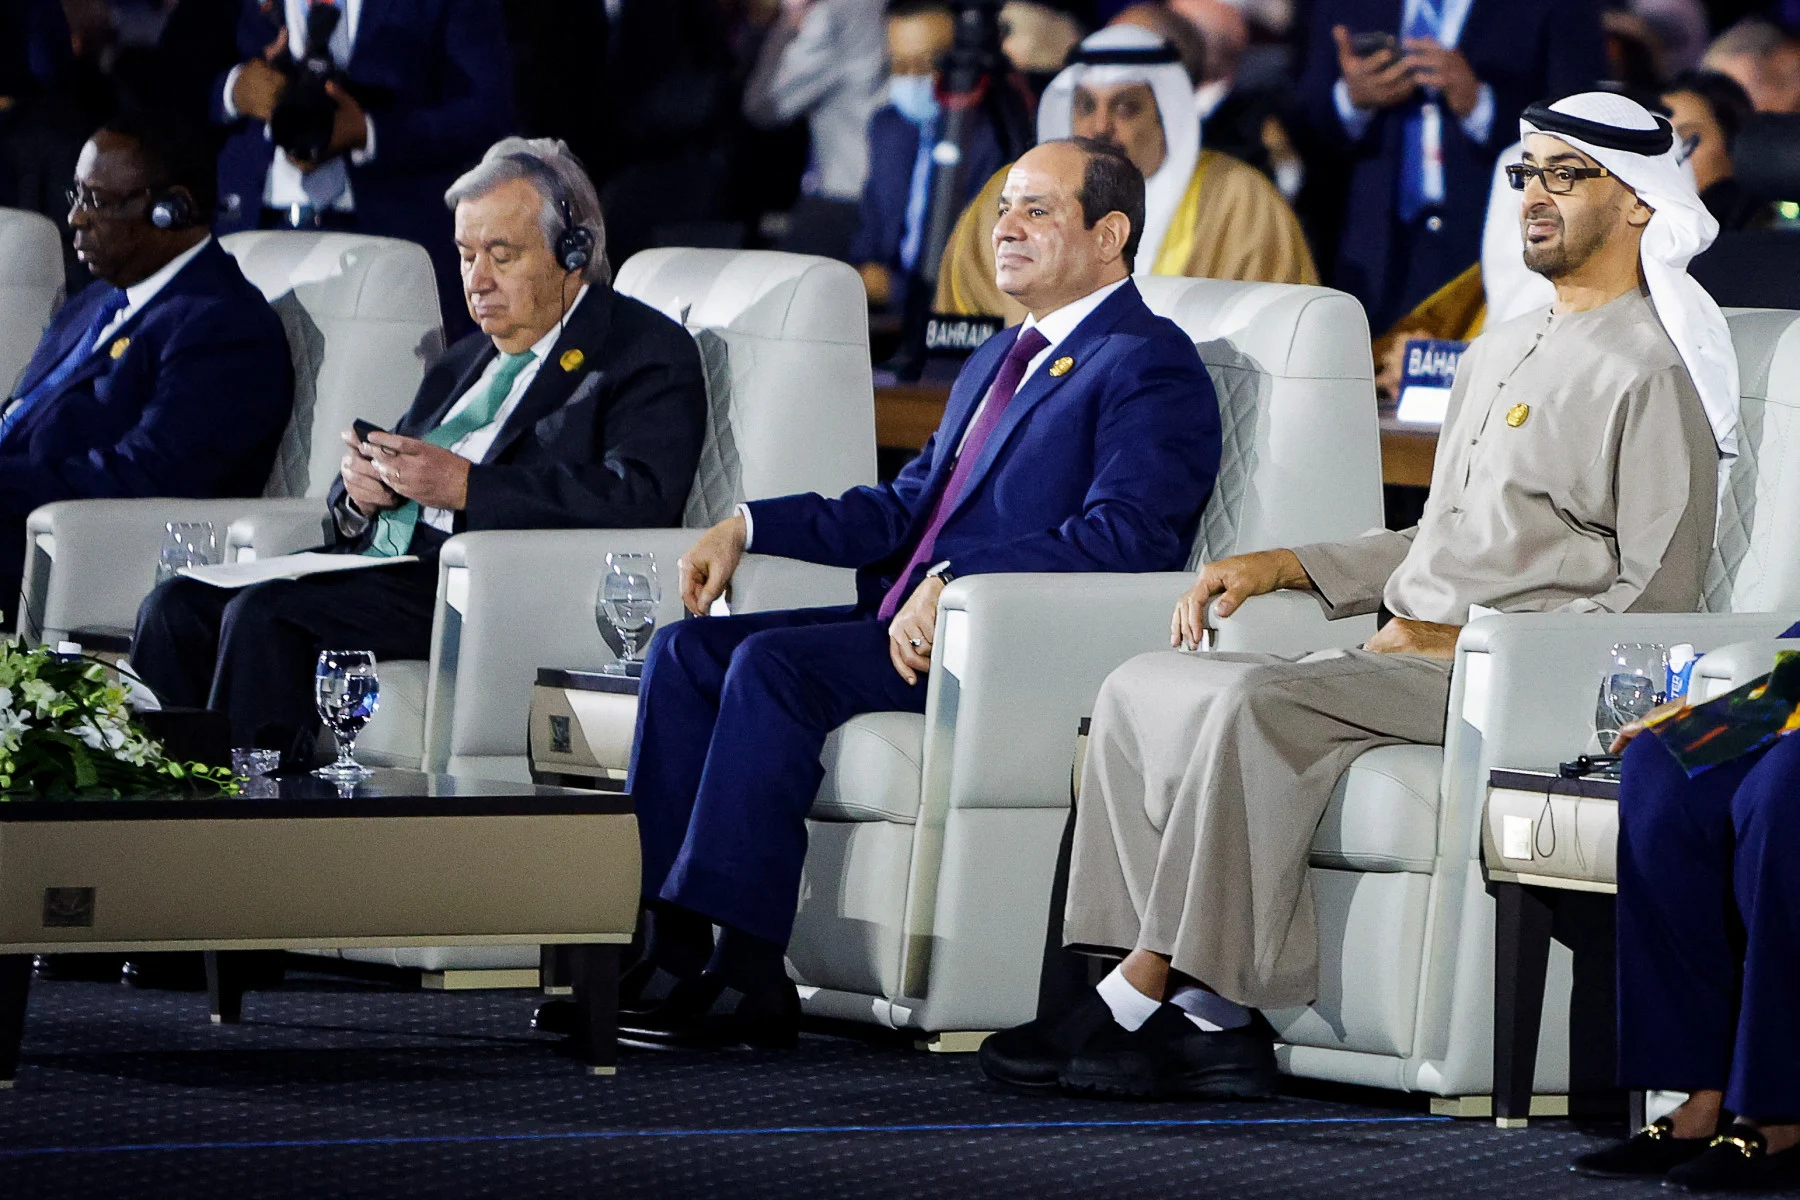 Secretary-General of the United Nations Antonio Guterres, Egyptian President Abdel Fattah al-Sisi and United Arab Emirates President Sheikh Mohamed bin Zayed Al-Nahyan attend the COP27 climate summit in Sharm el-Sheikh, Egypt November 7, 2022. (REUTERS/Mohammed Salem)